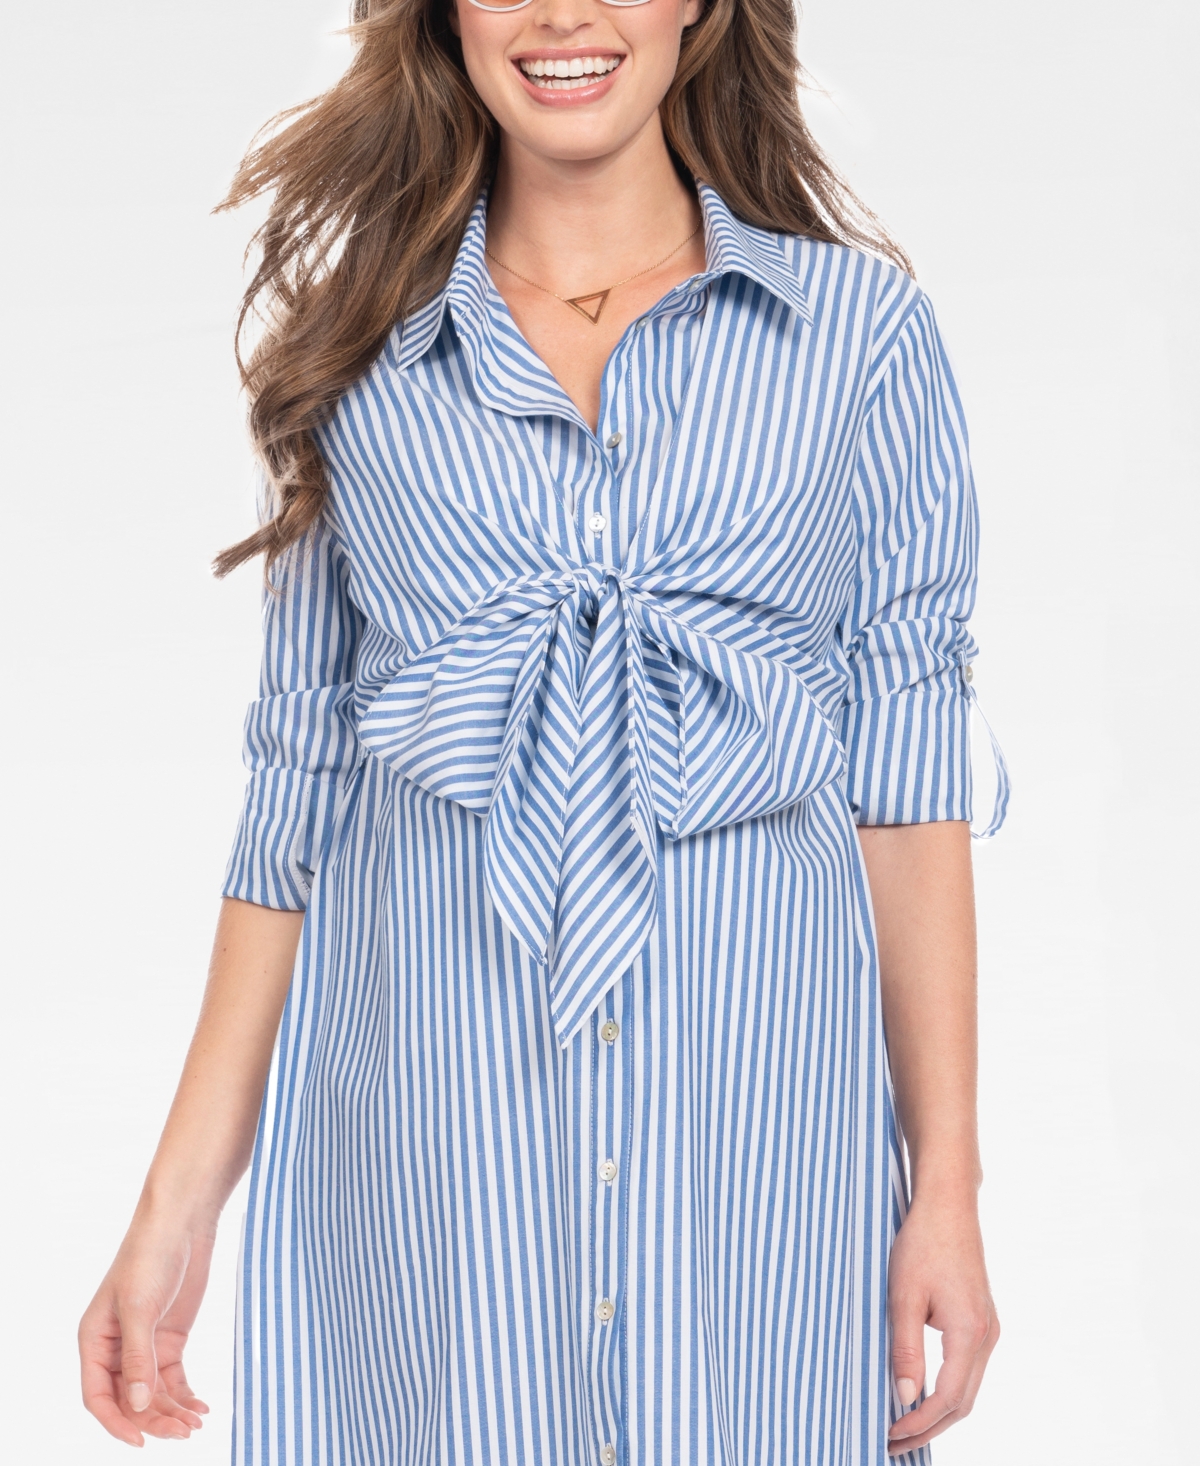 Shop Seraphine Women's Cotton And Lyocell Maternity And Nursing Shirt Dress In Blue Stripe